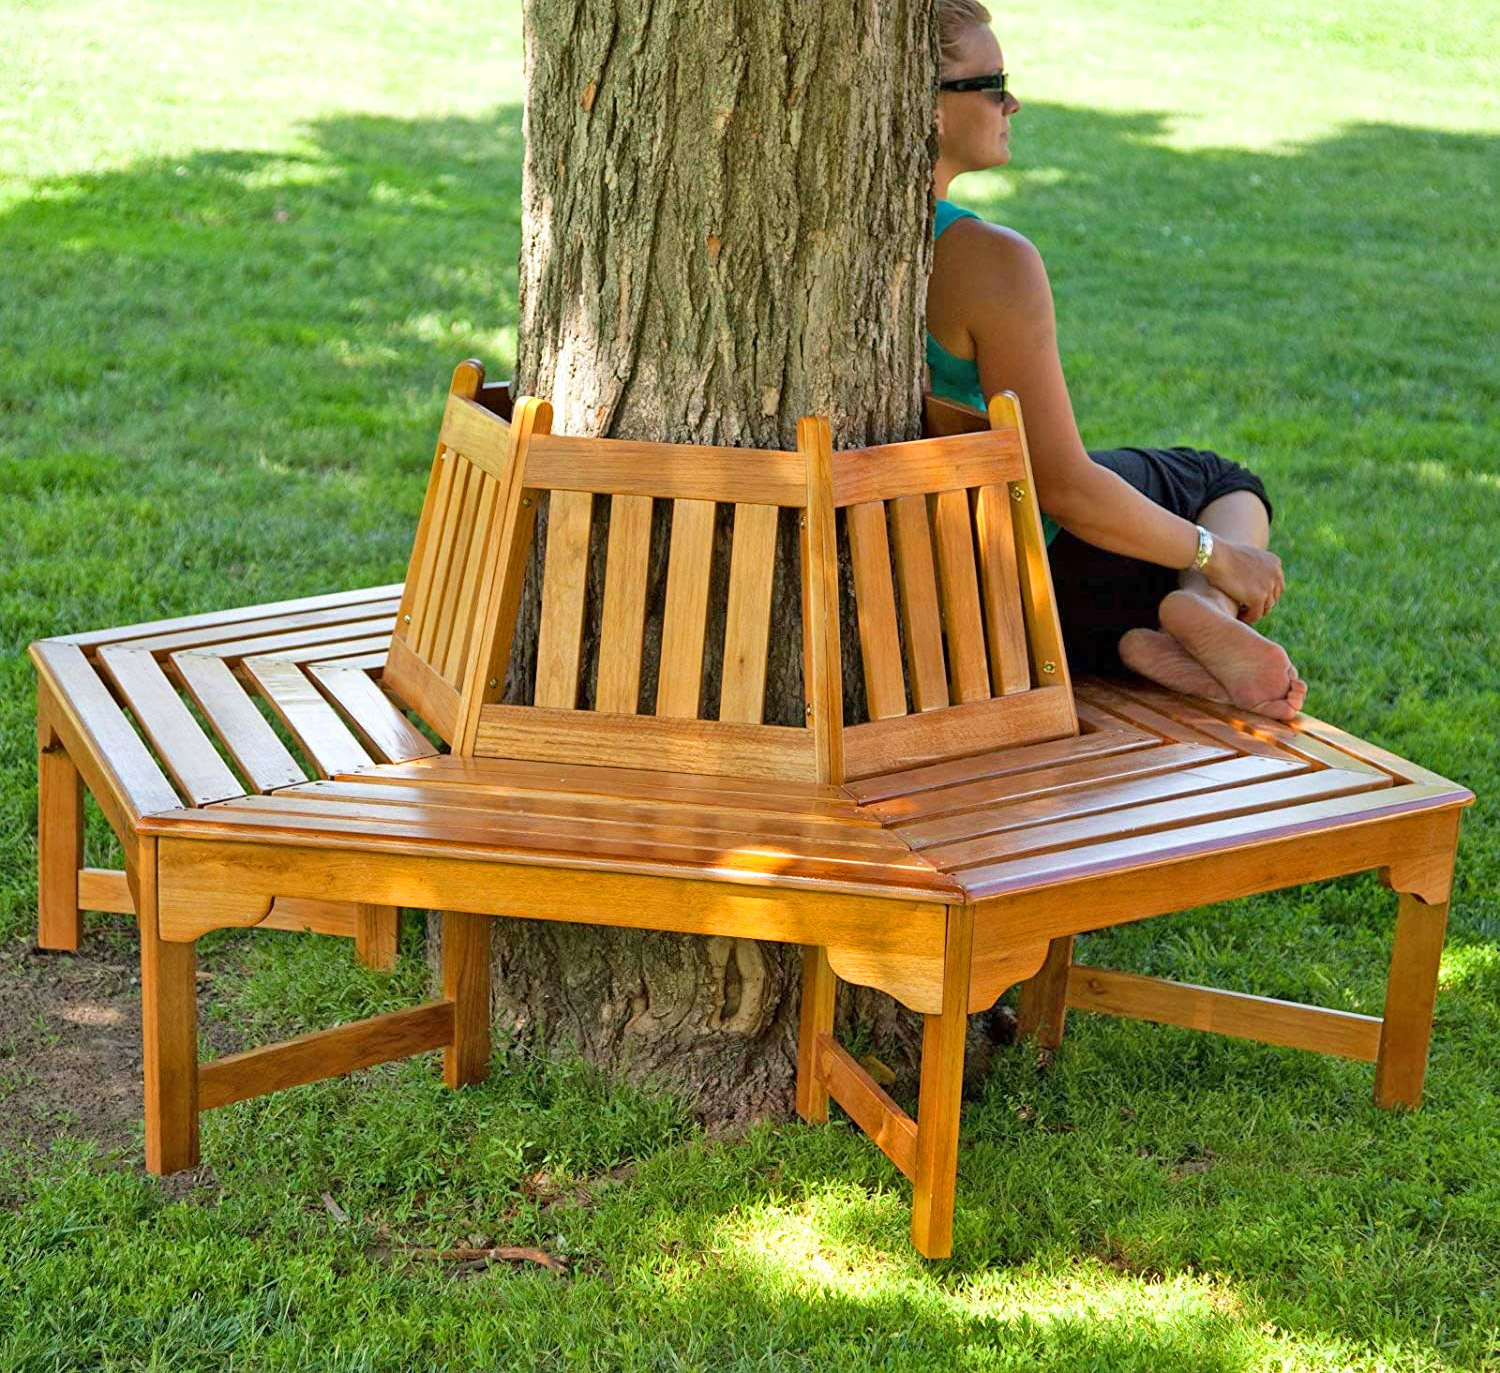 These Wrap Around Tree Benches Provide, Bench Around The Tree